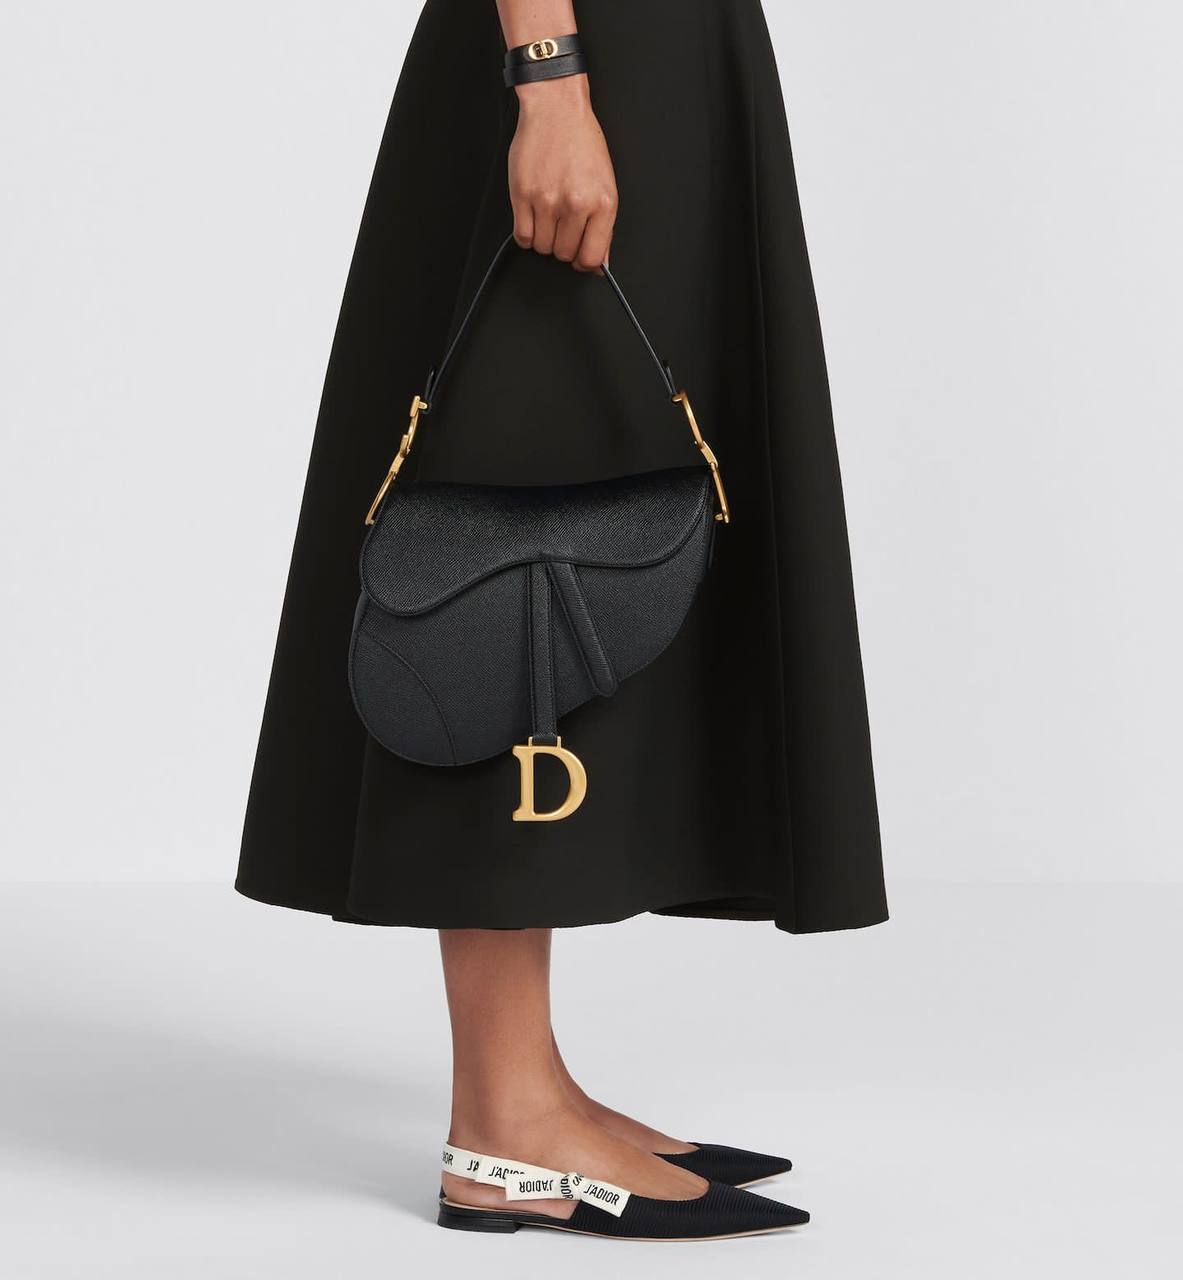 The Price of Dior Handbags in South Africa